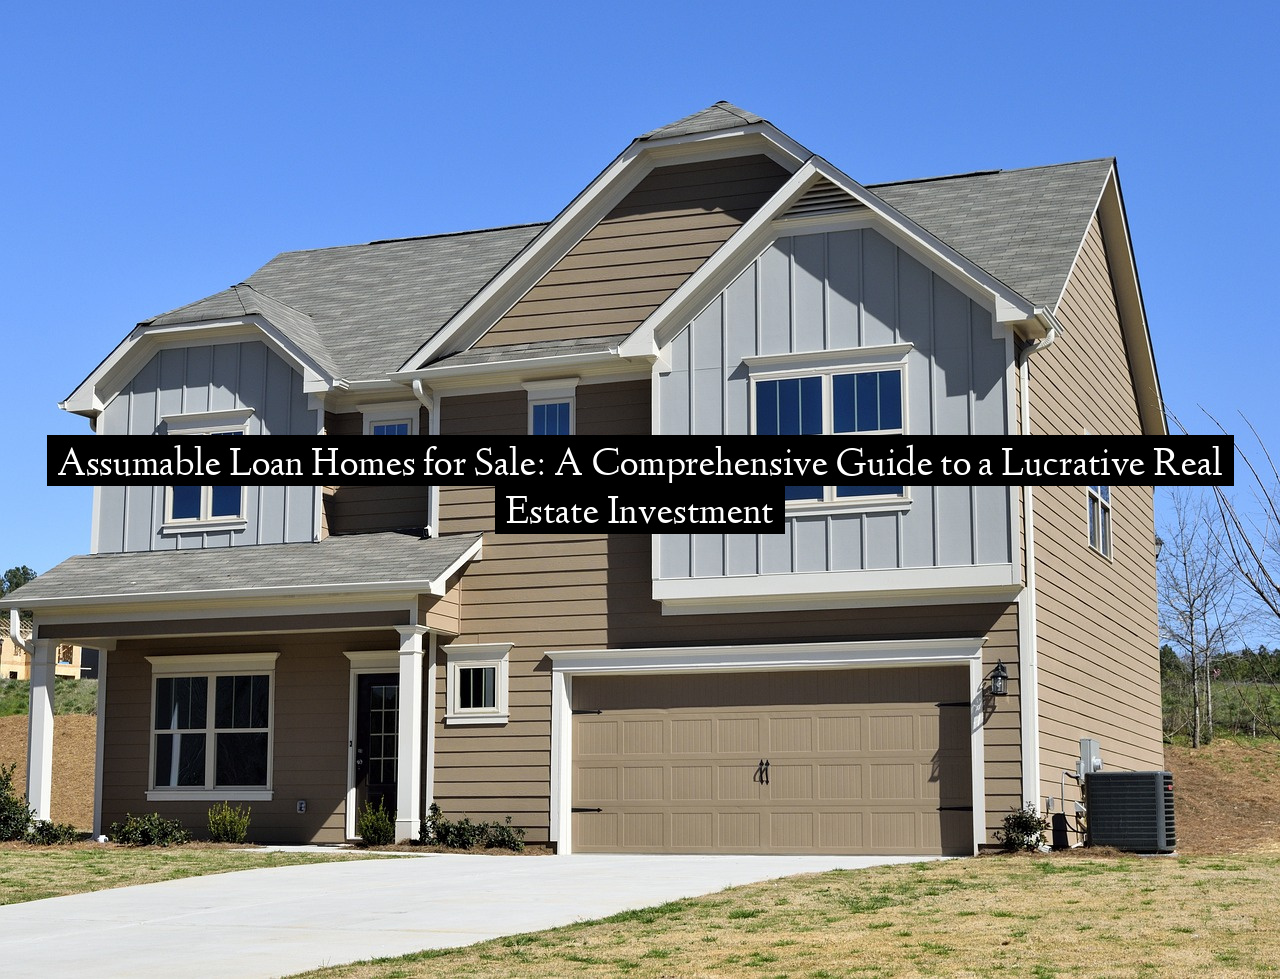 Assumable Loan Homes for Sale: A Comprehensive Guide to a Lucrative Real Estate Investment